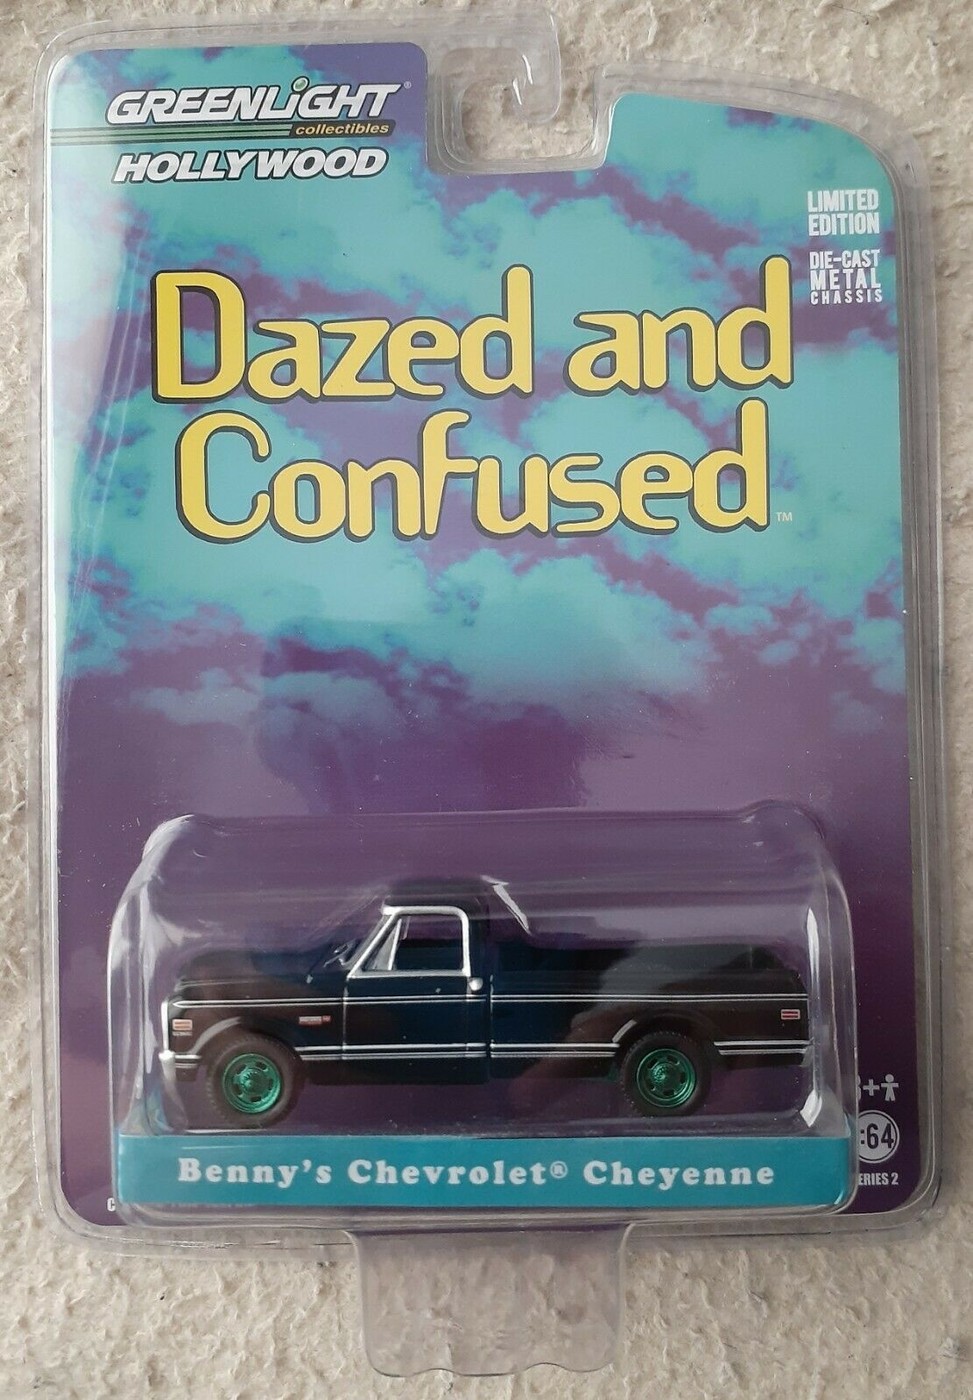 Dazed and Confused 20111 Greenlight Hollywood Series 2 Benny's